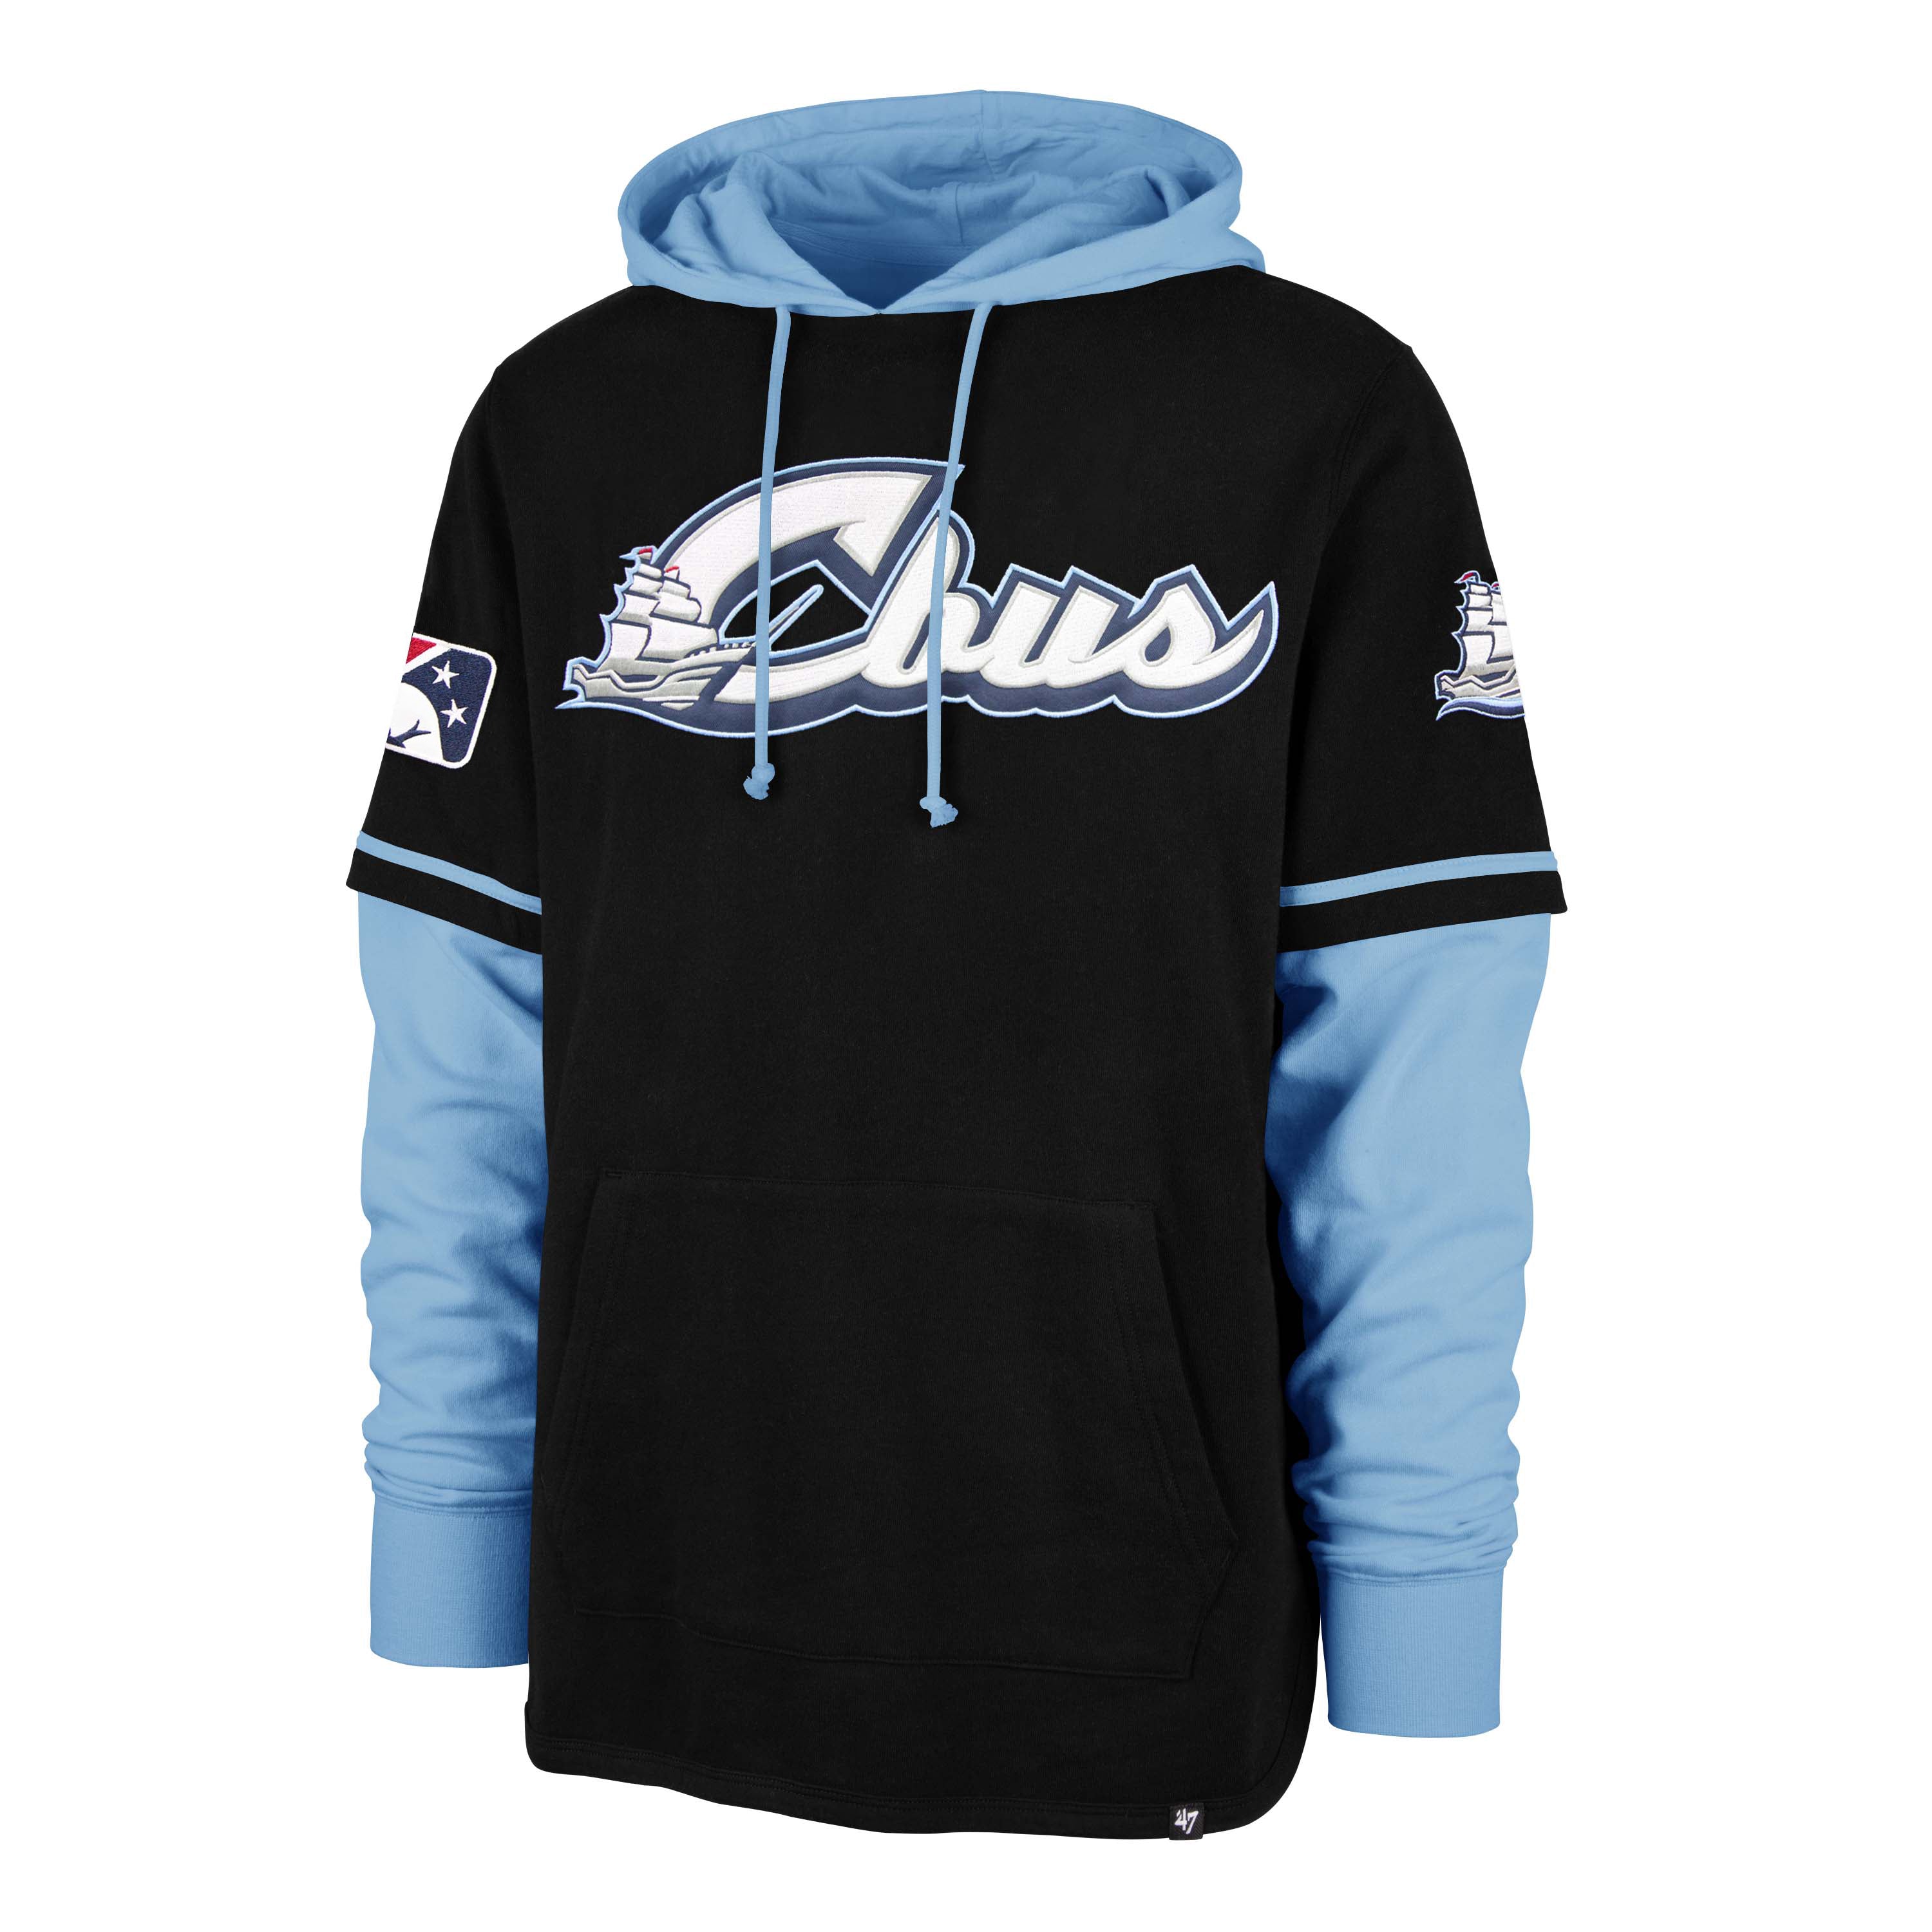 Columbus Clippers 47 Brand Trifecta Shortstop Pullover M